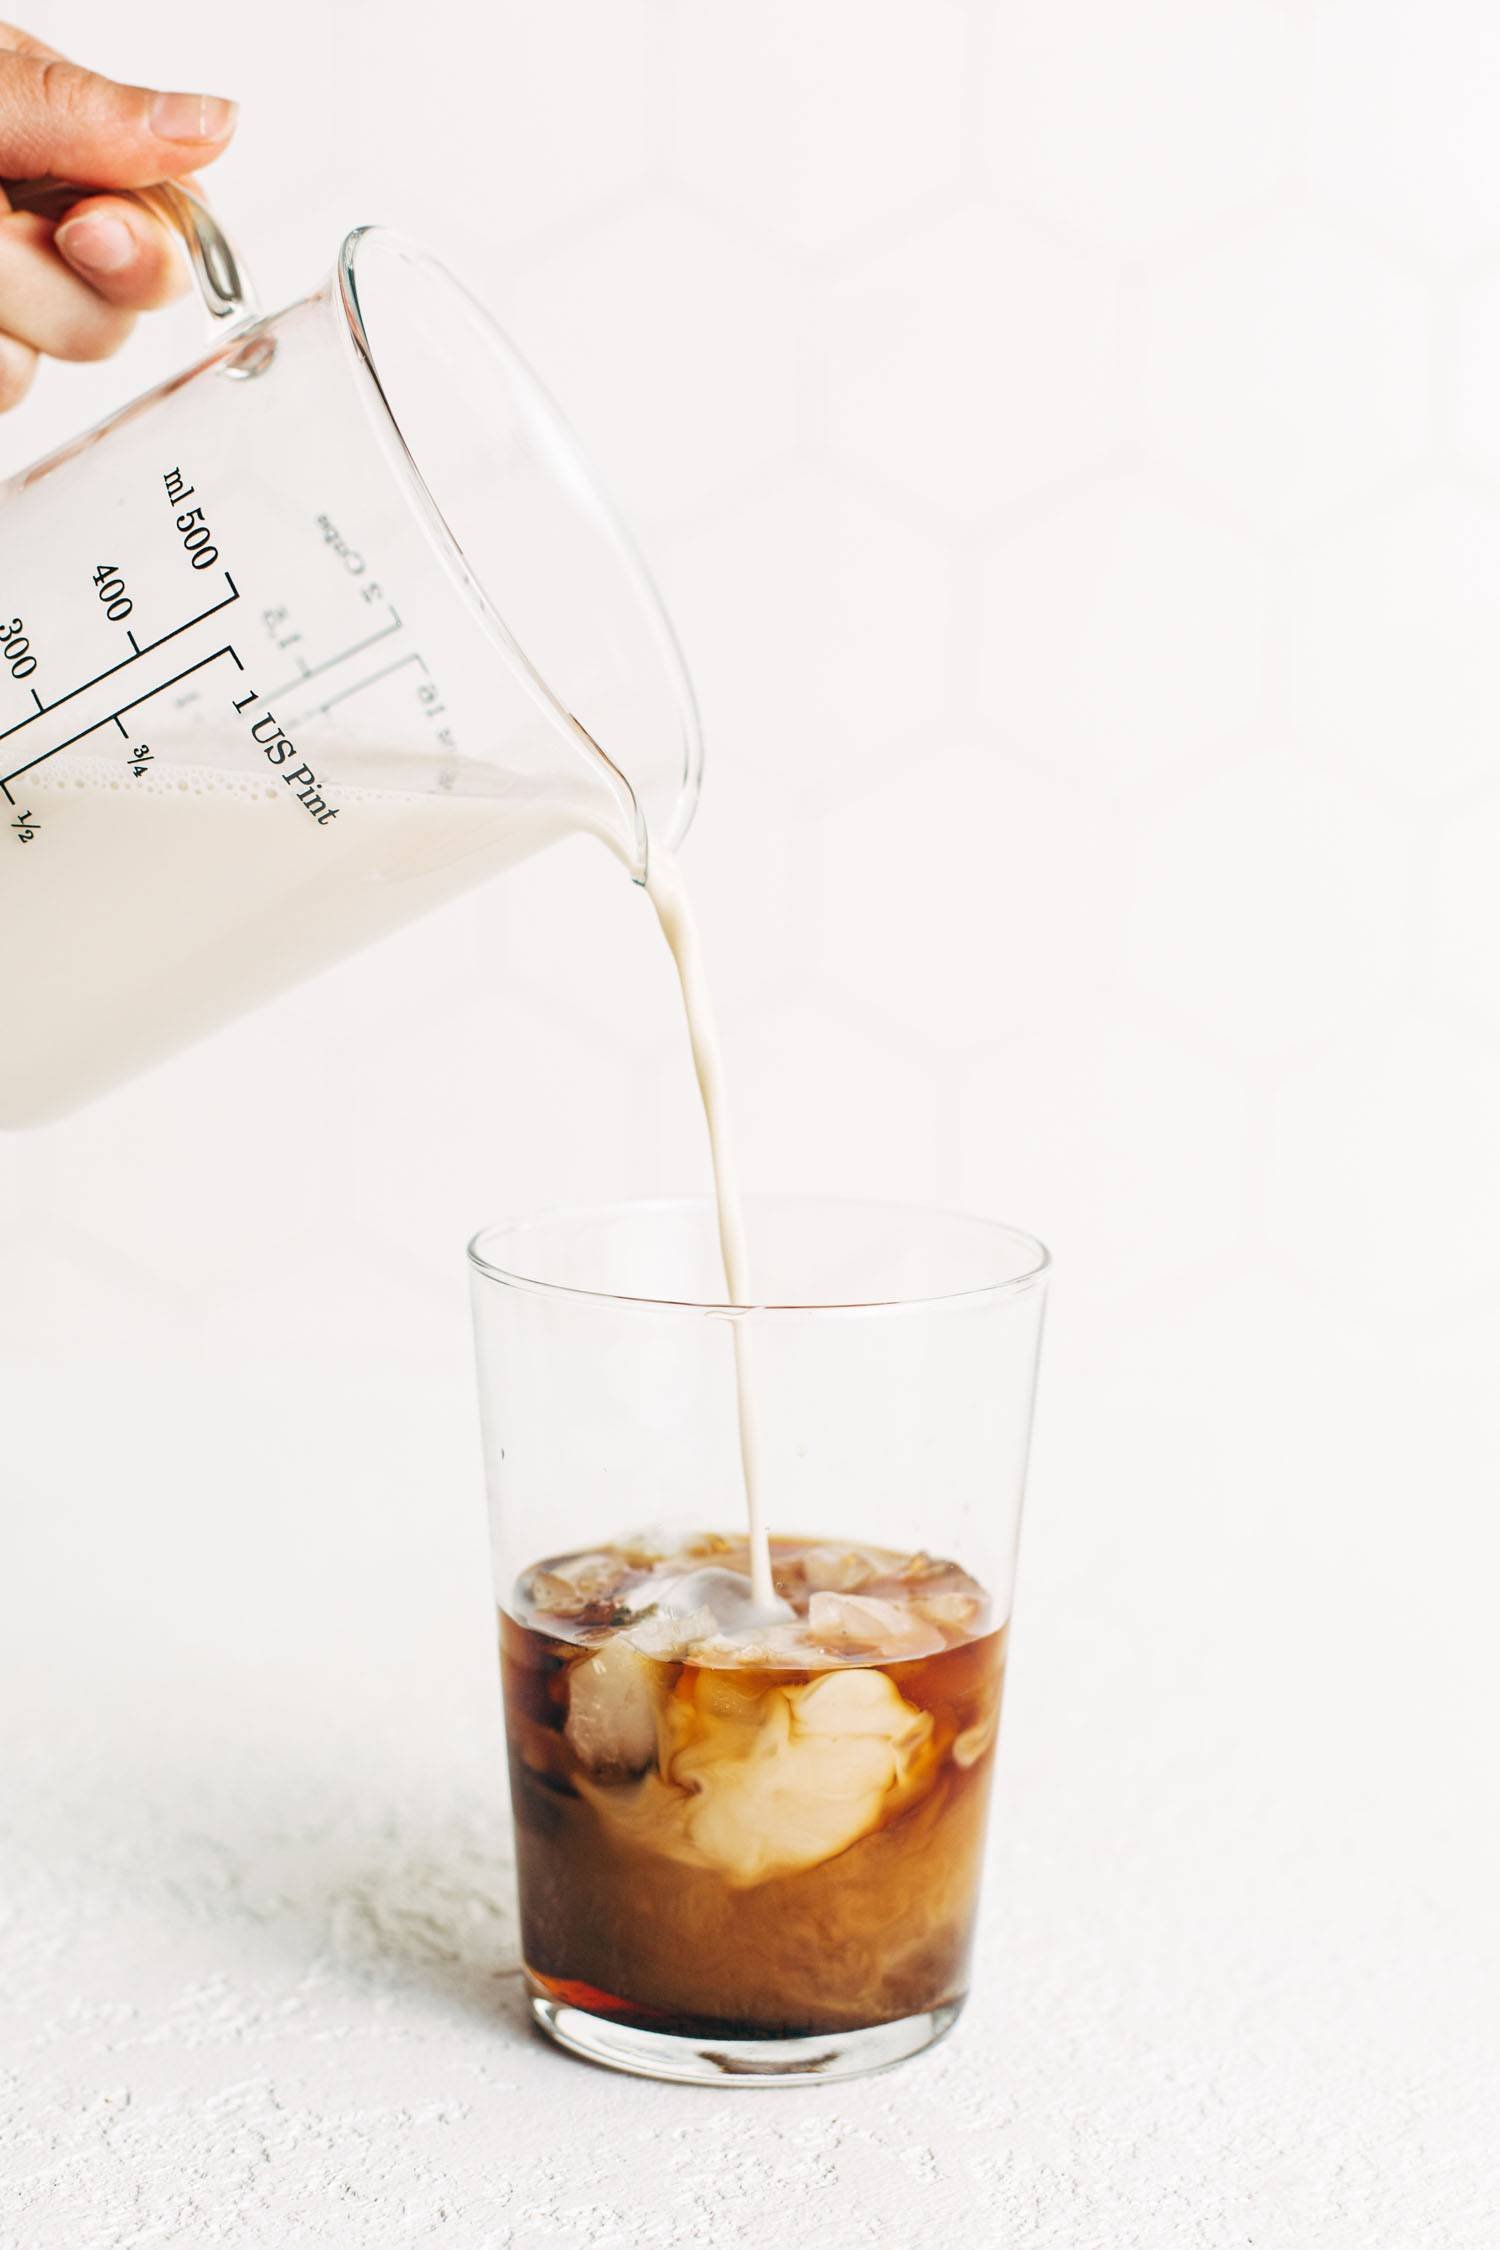 Measuring cup pouring oat milk into a glass of iced coffee.